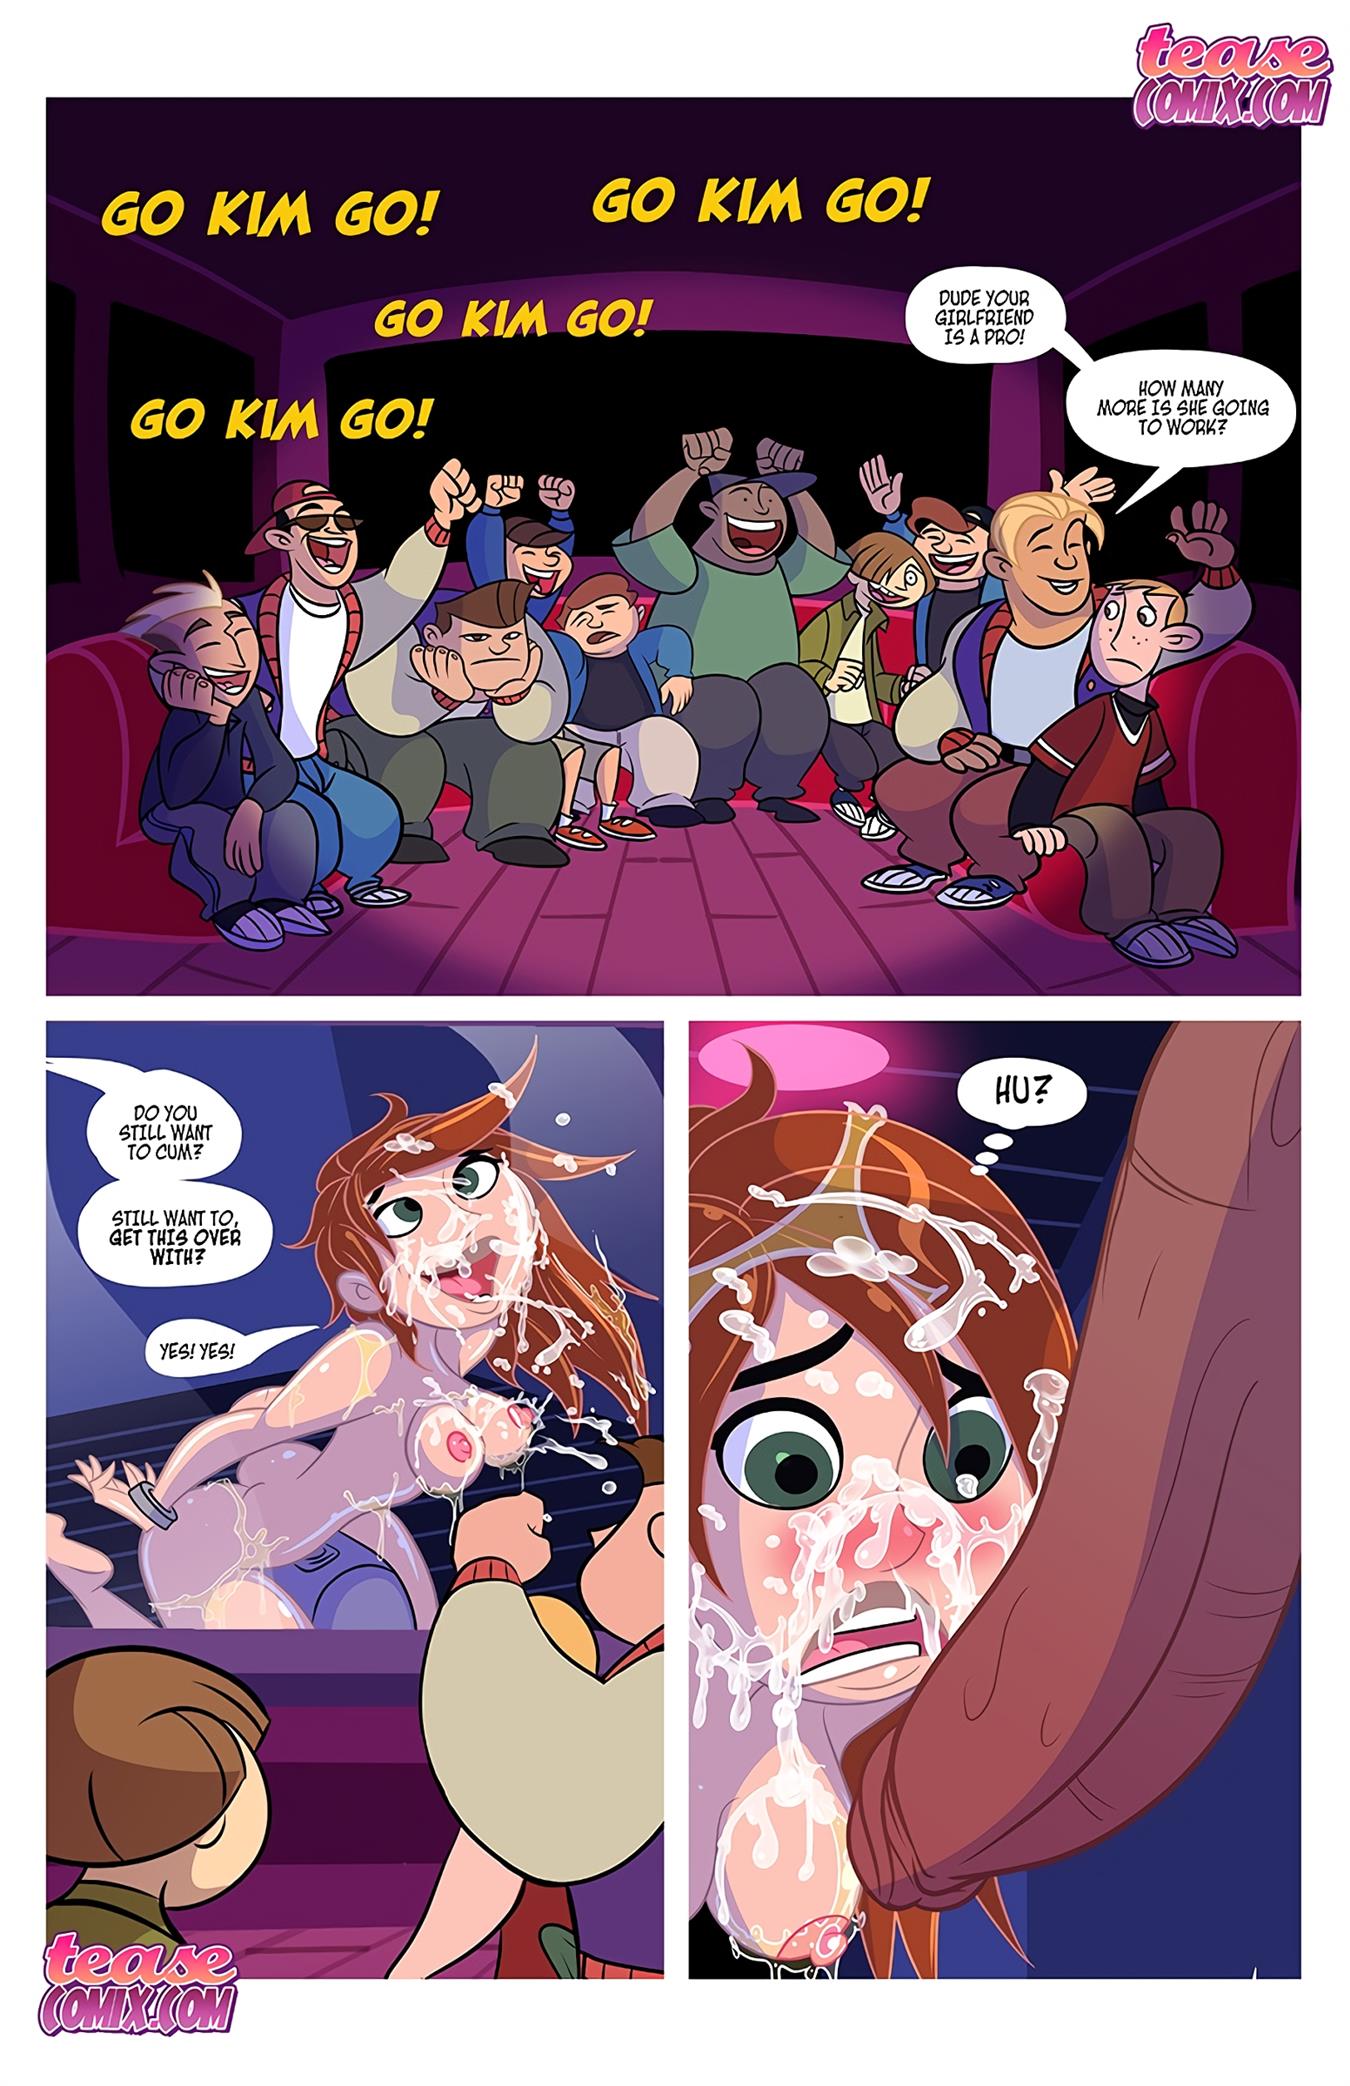 Cheer Fight (Kim Possible) [Tease Comix]